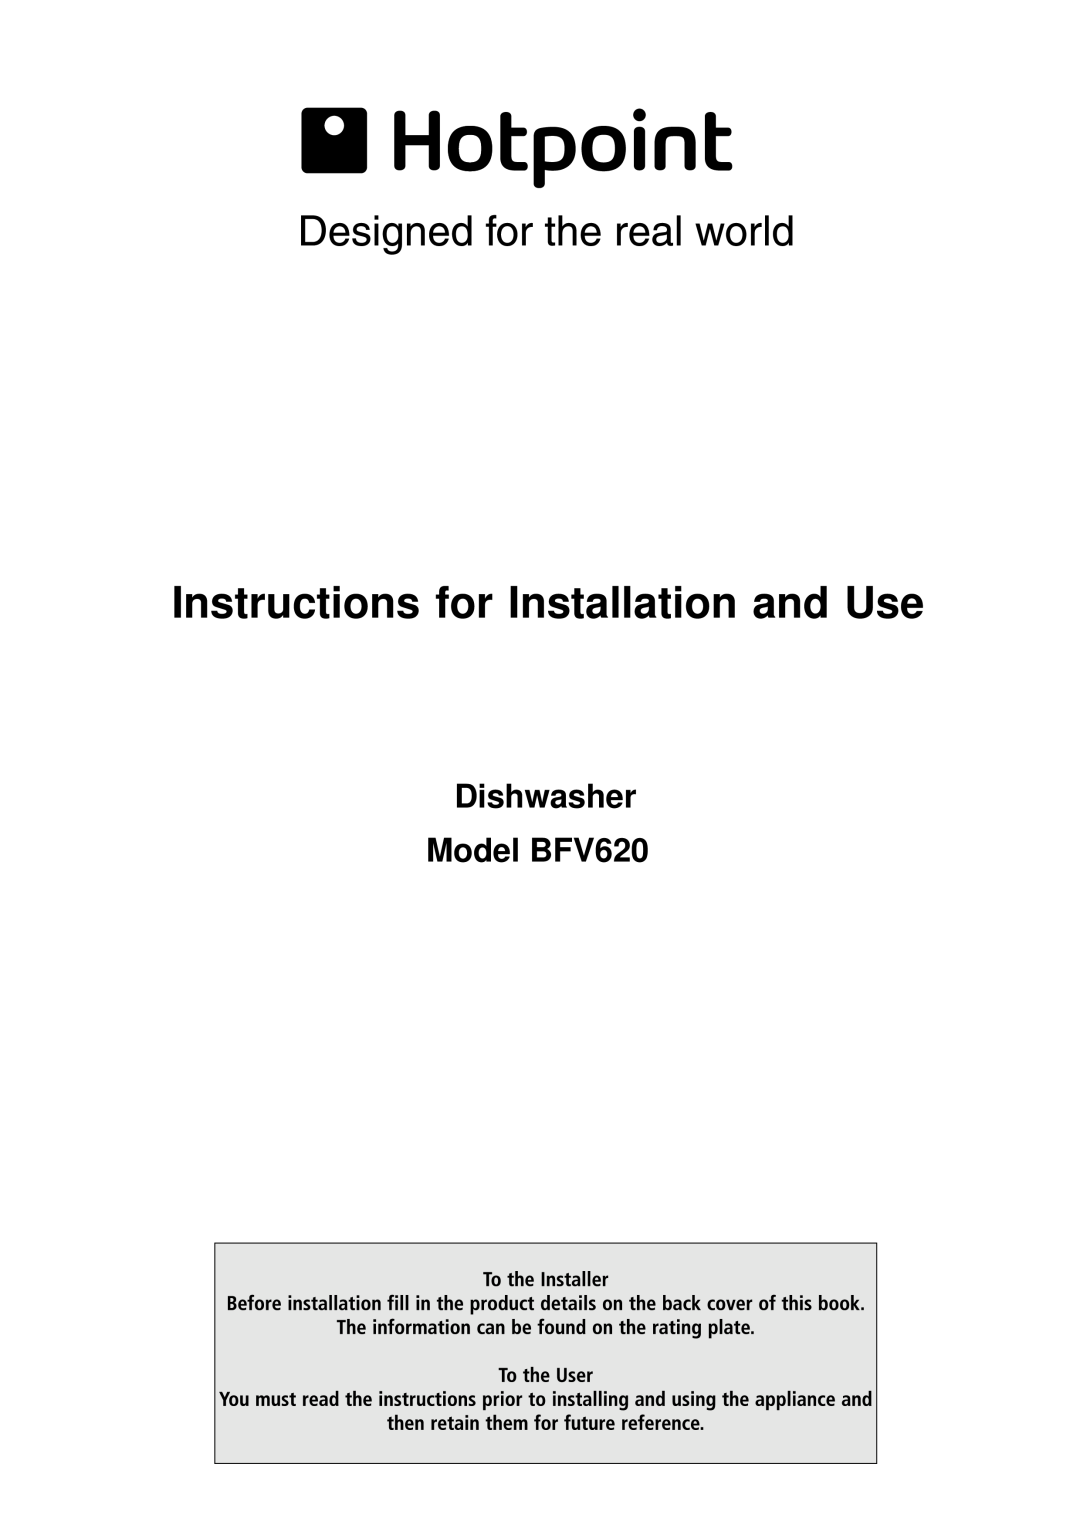 Hotpoint manual Instructions for Installation and Use, Dishwasher Model BFV620 